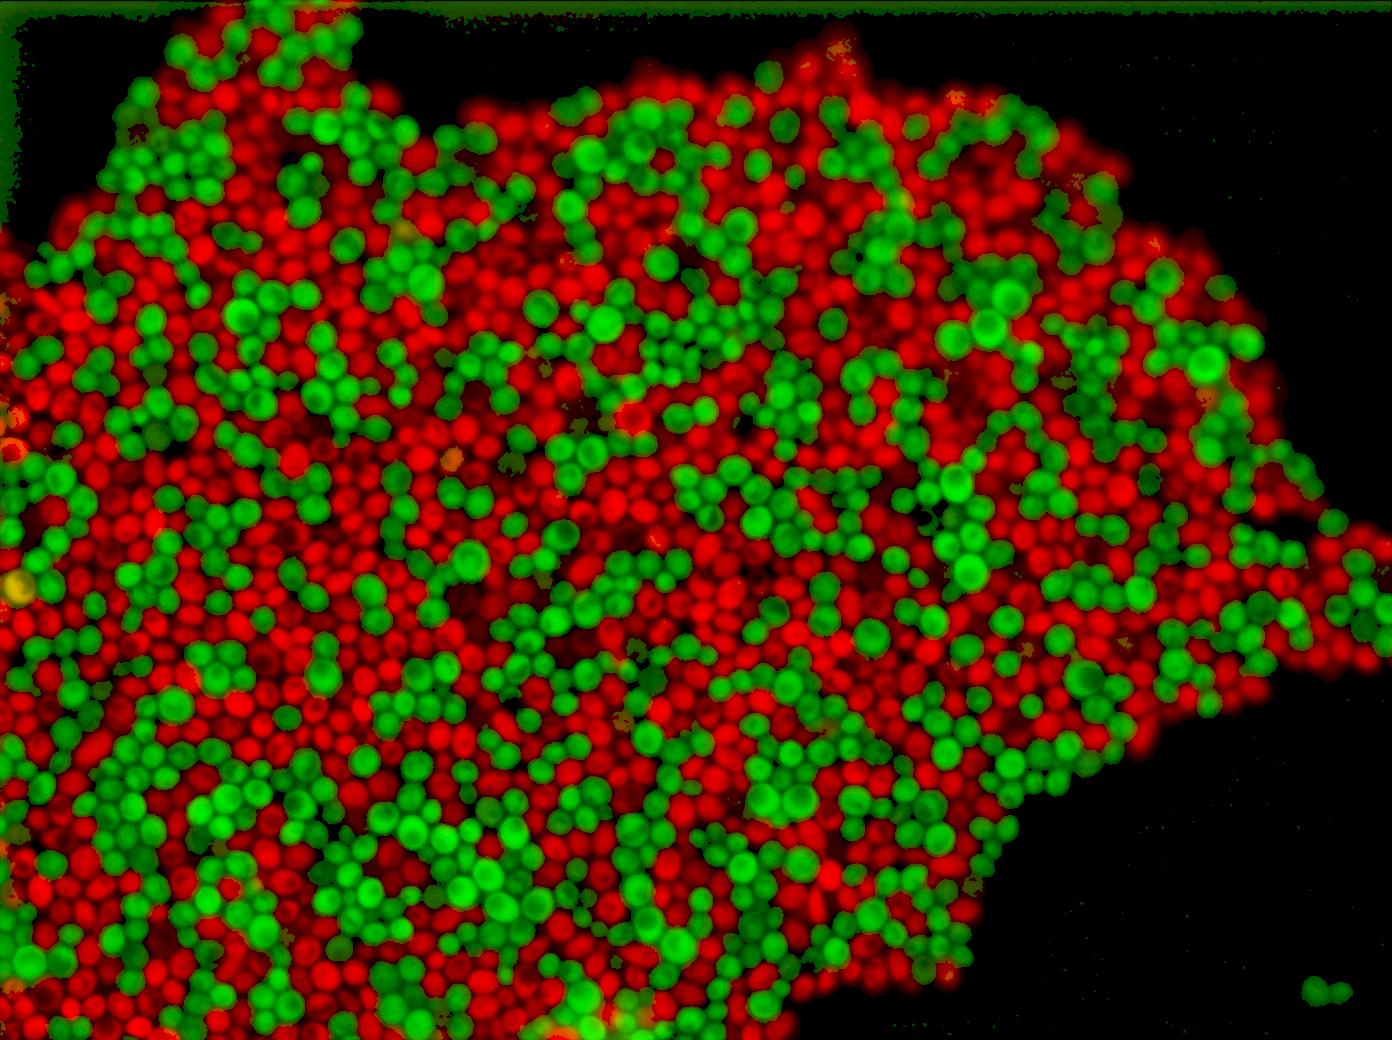 Green and red dots, cells on a black background